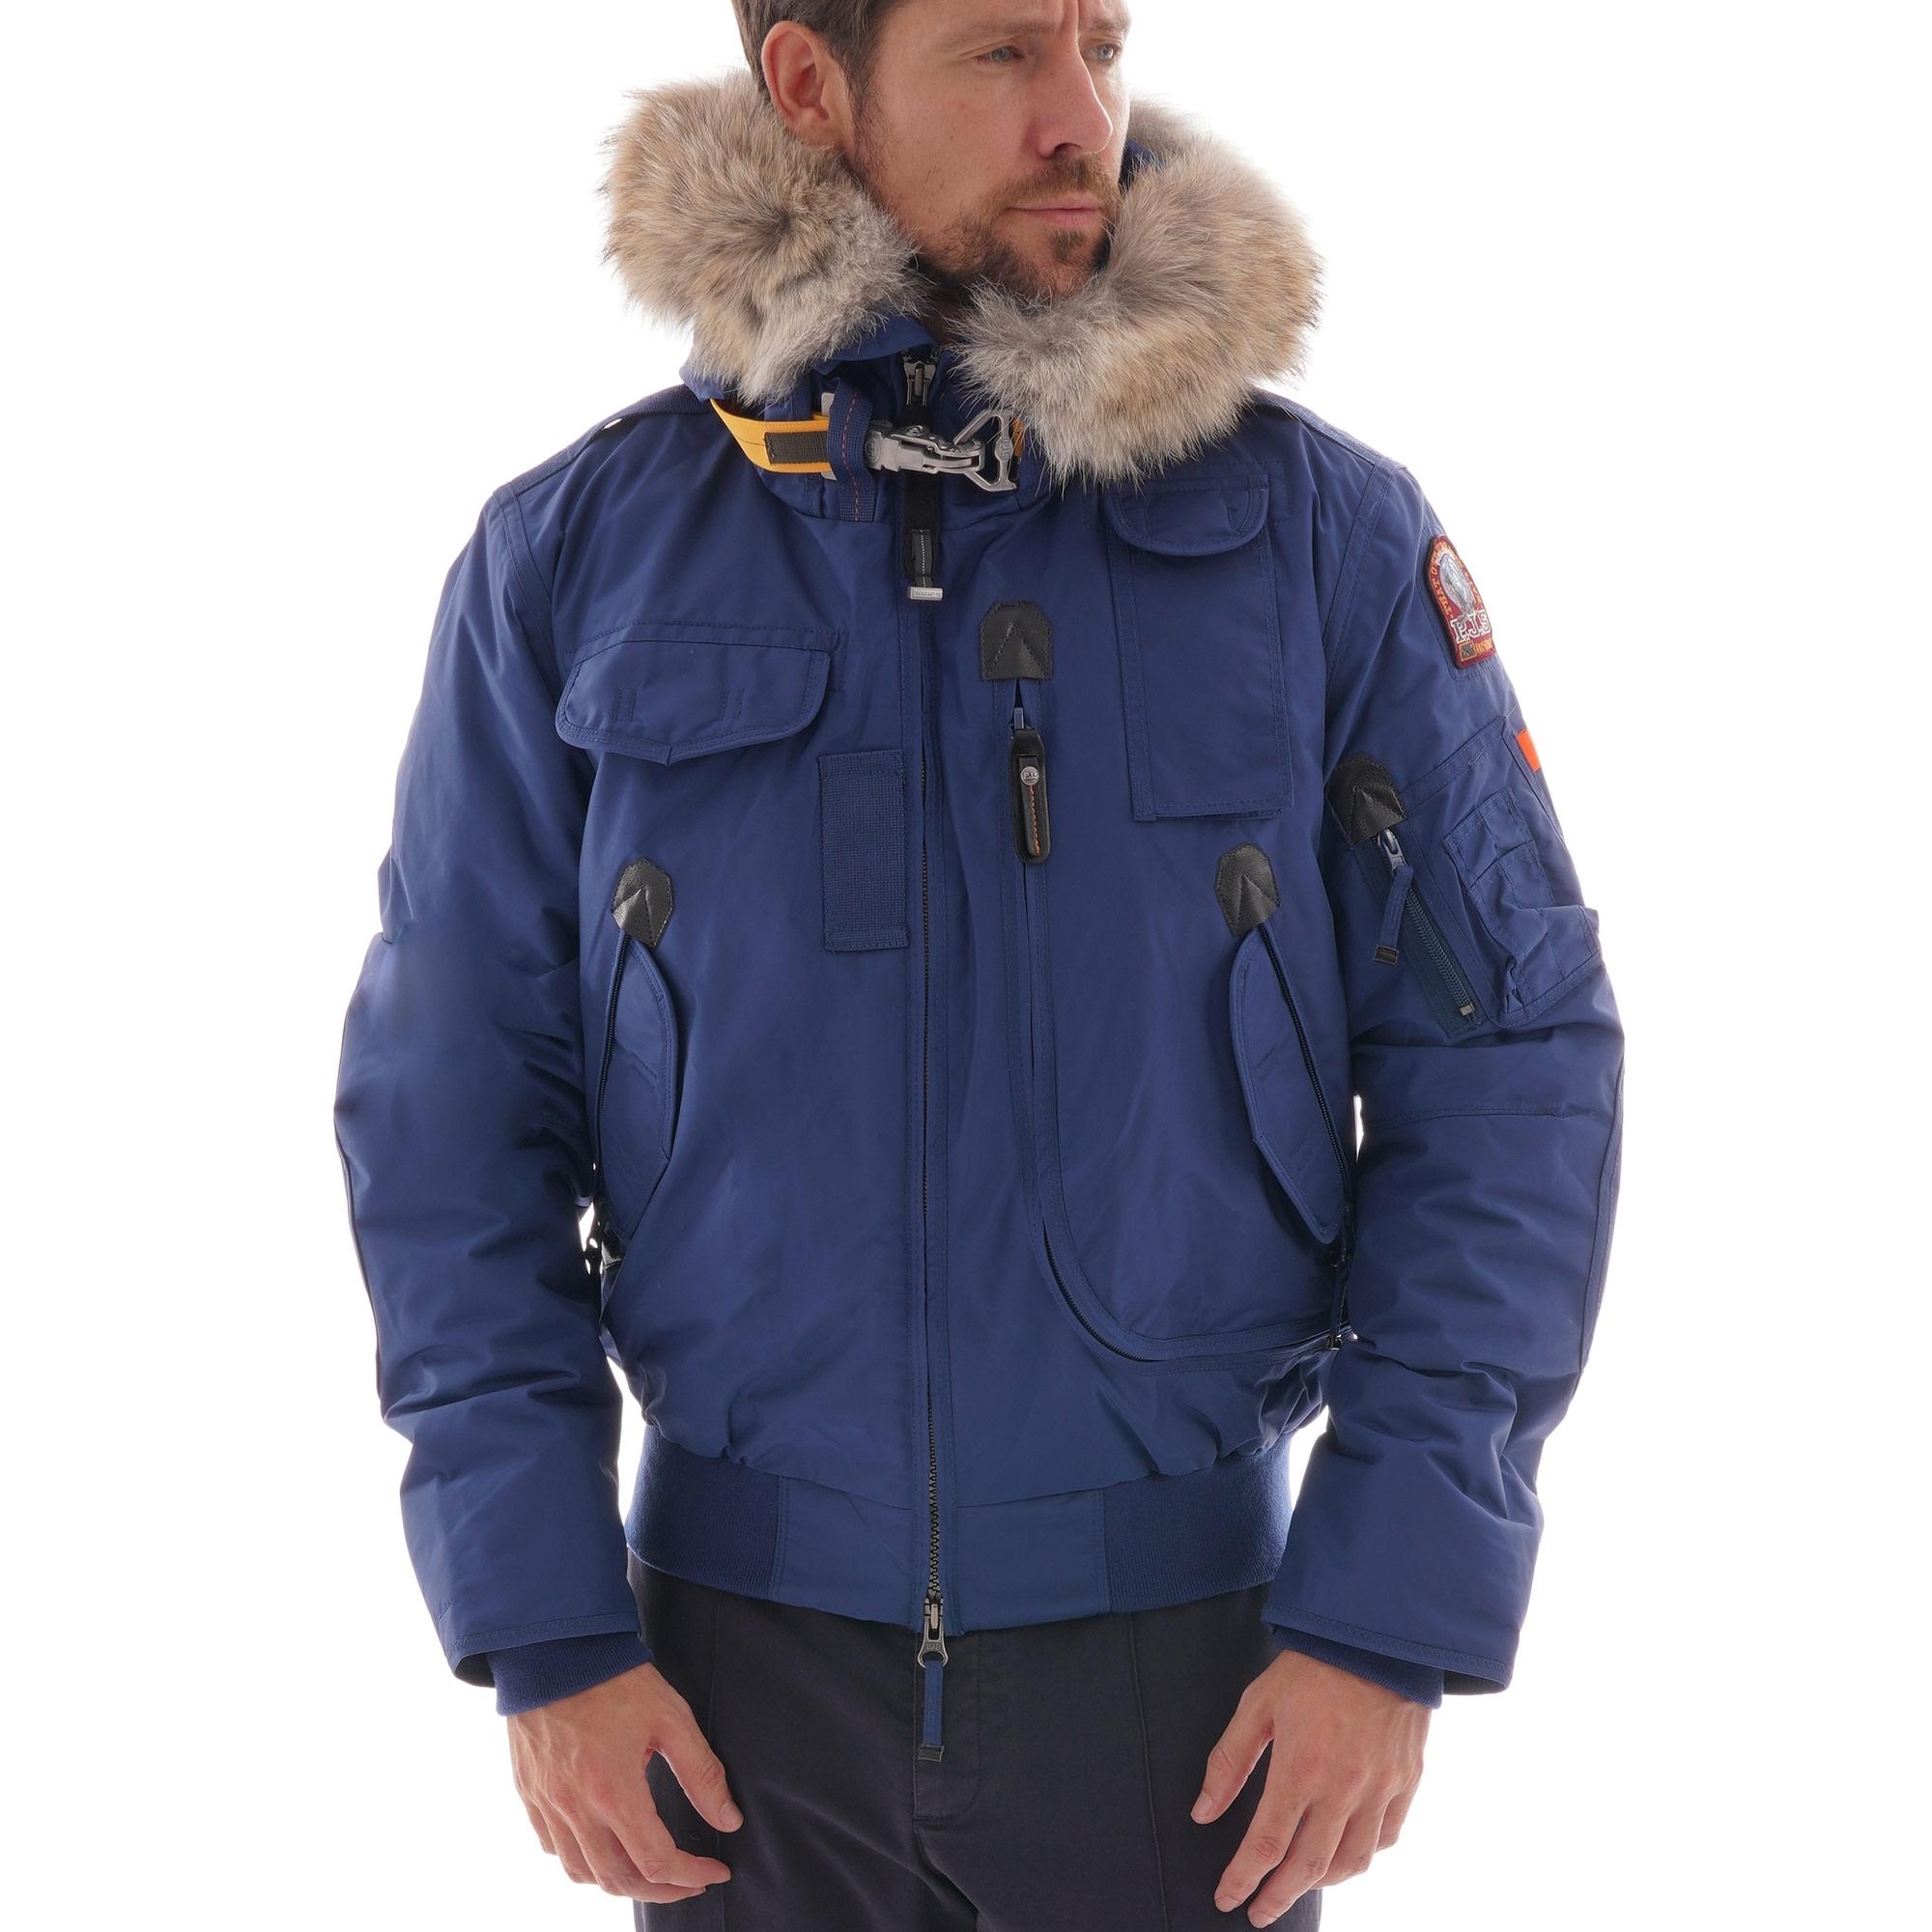 Parajumpers Synthetic Parajumper Gobi Jacket in Navy (Blue) for Men - Lyst